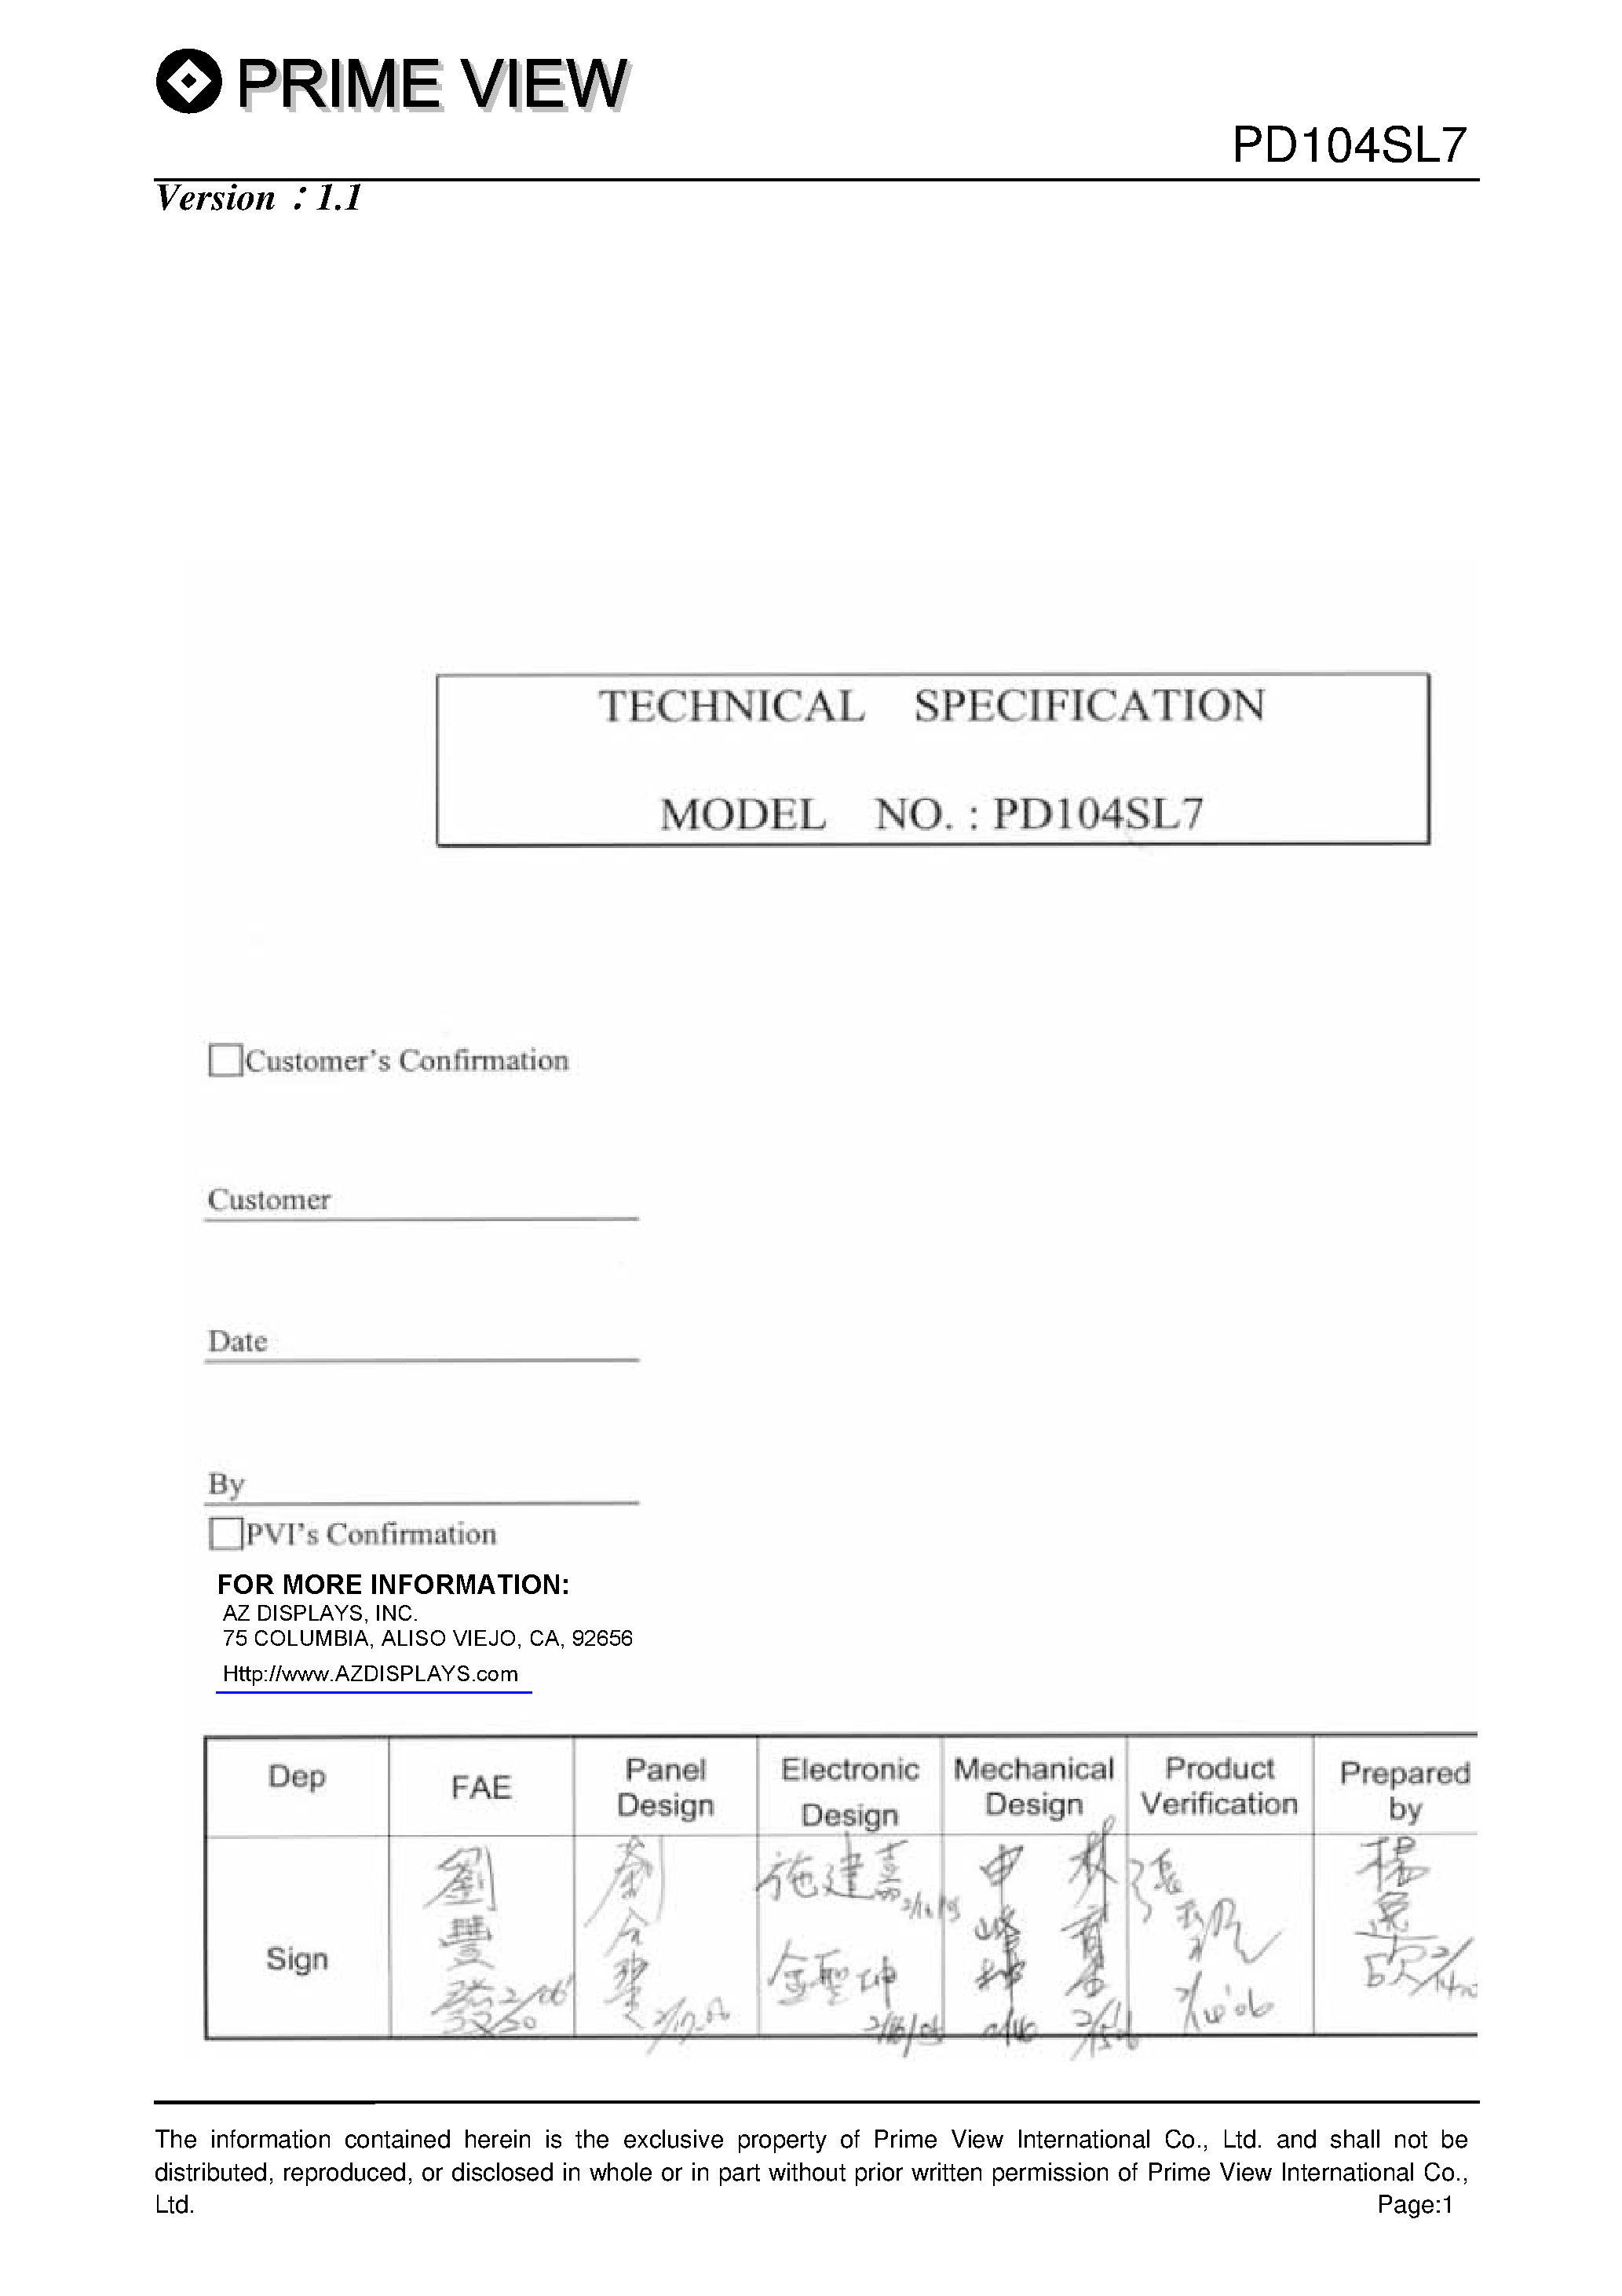 Datasheet PD104SL7 - TECHNICAL SPECIFICATION page 1